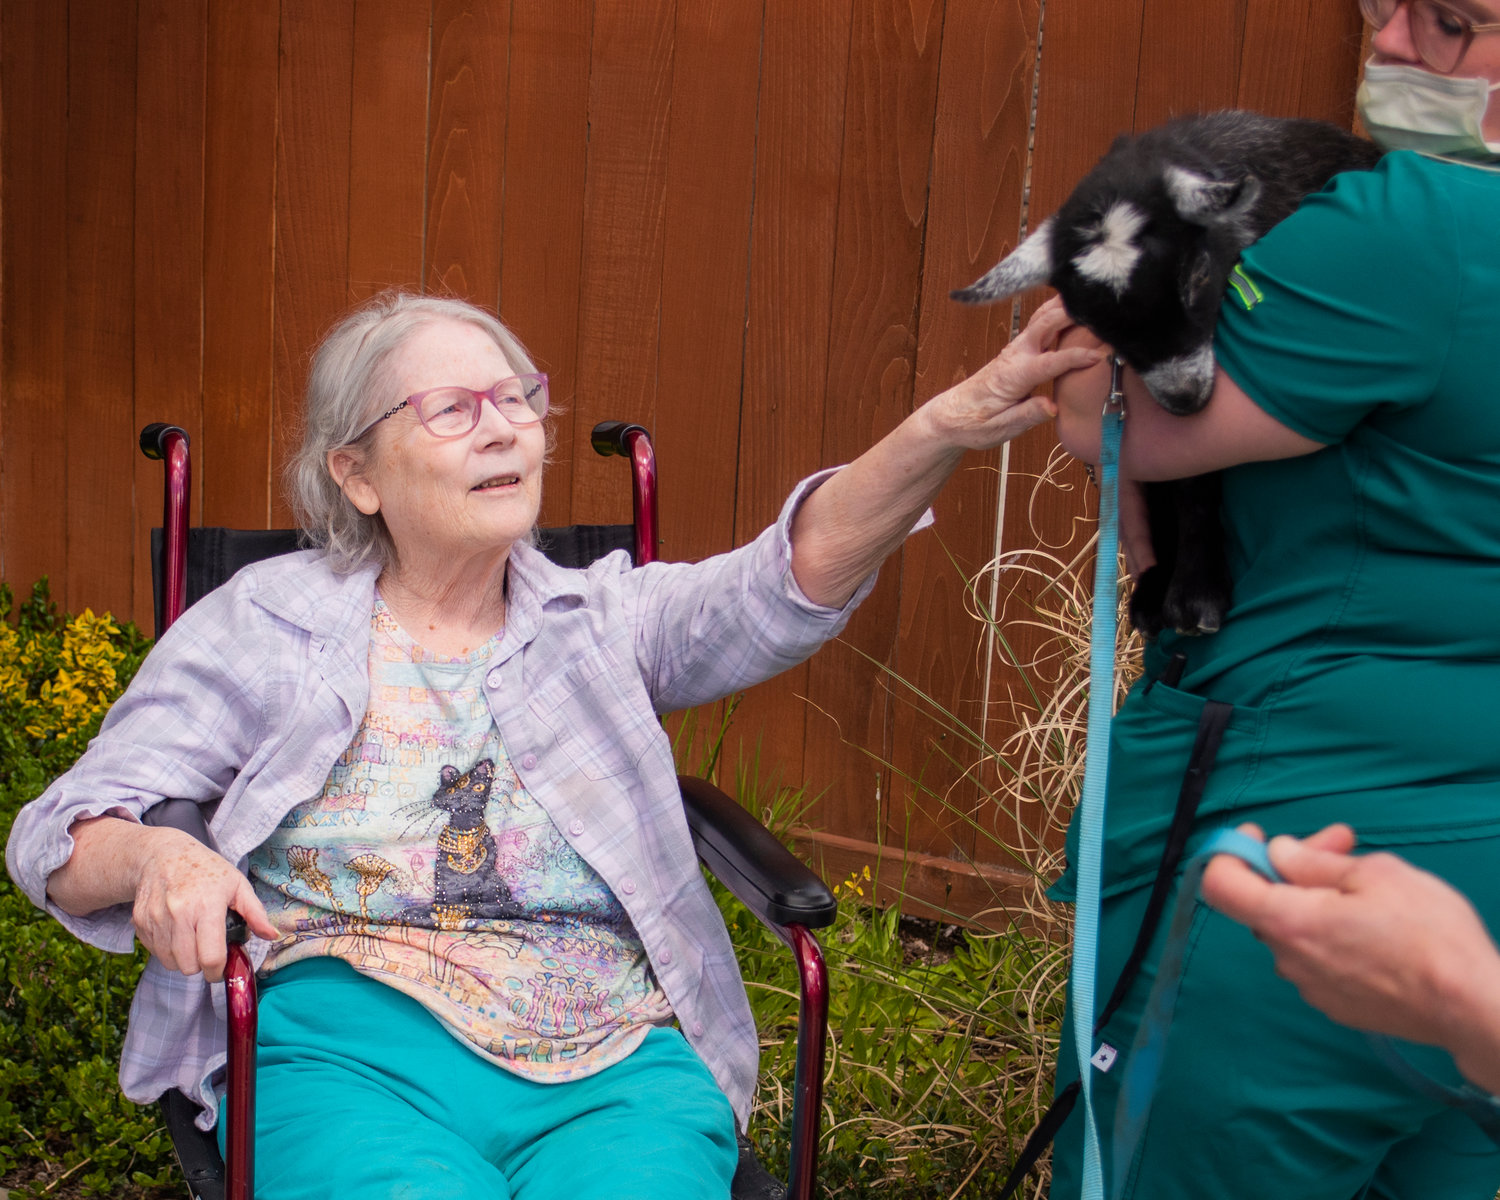 Barb Boohm reaches up to pet a baby pygmy goat at Woodland Village Concepts of Chehalis on Thursday.